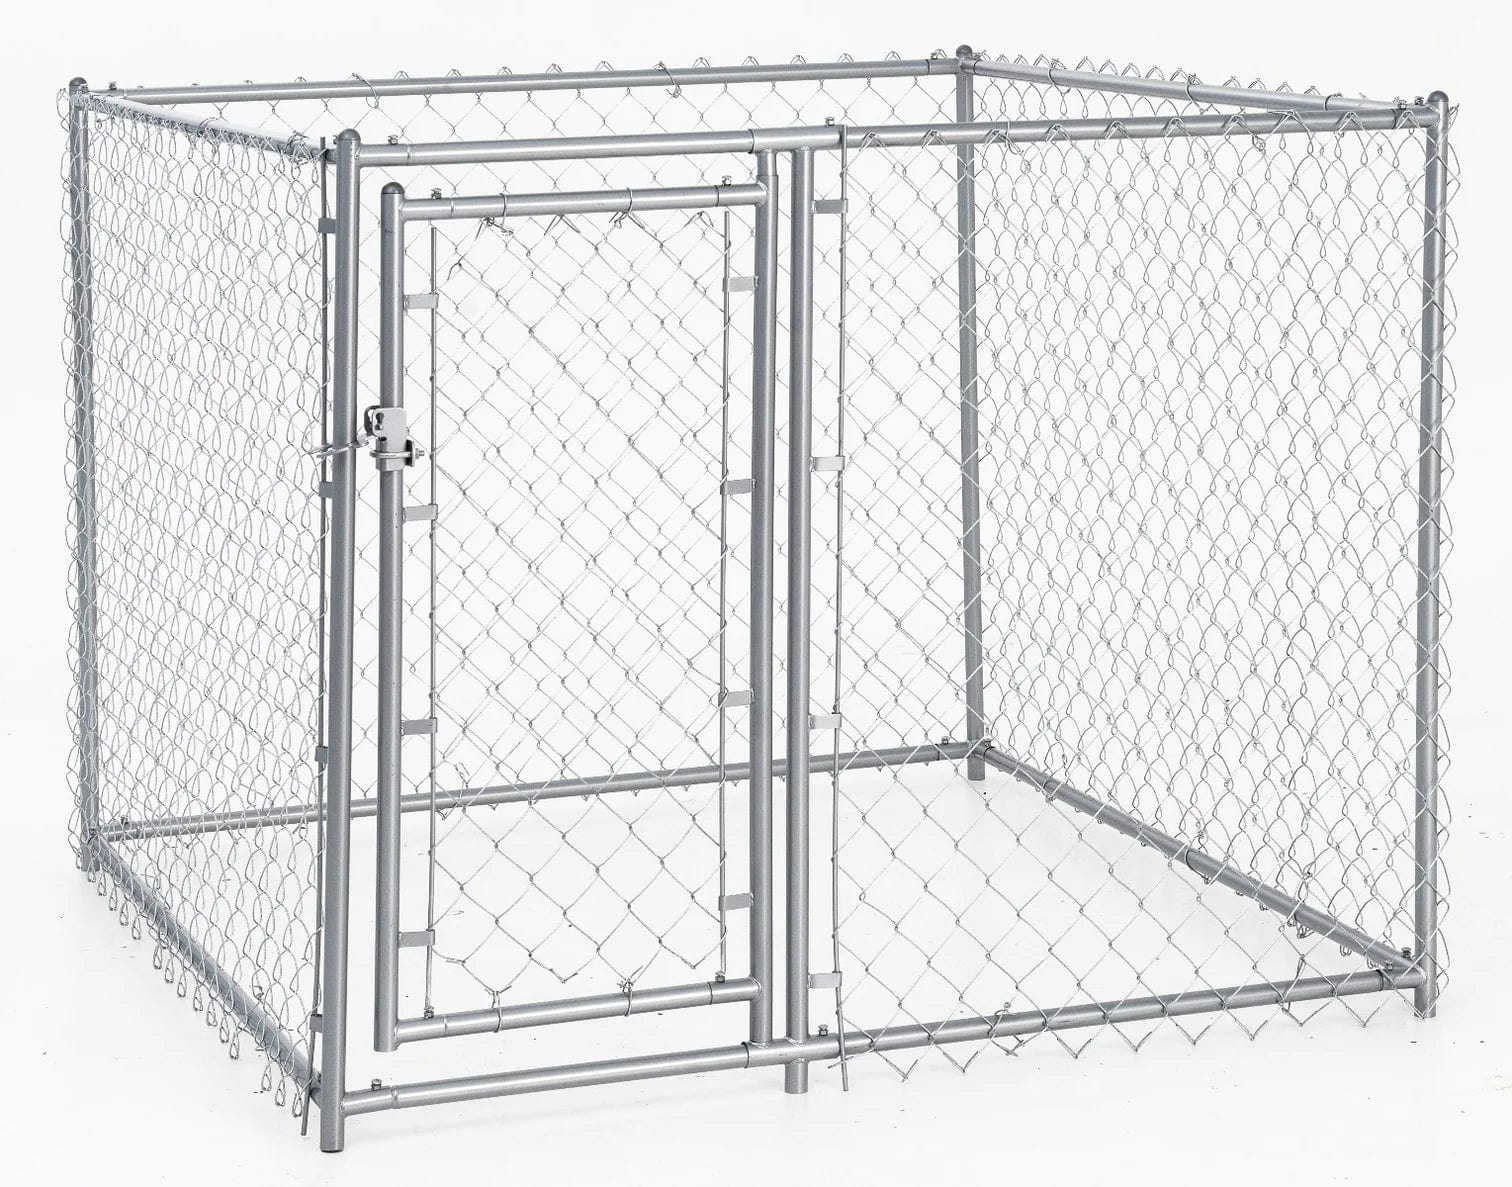 Lucky Dog Galvanized Chain Link w/PC Frame Kit in a Box 5'L x 5'W x 4'H